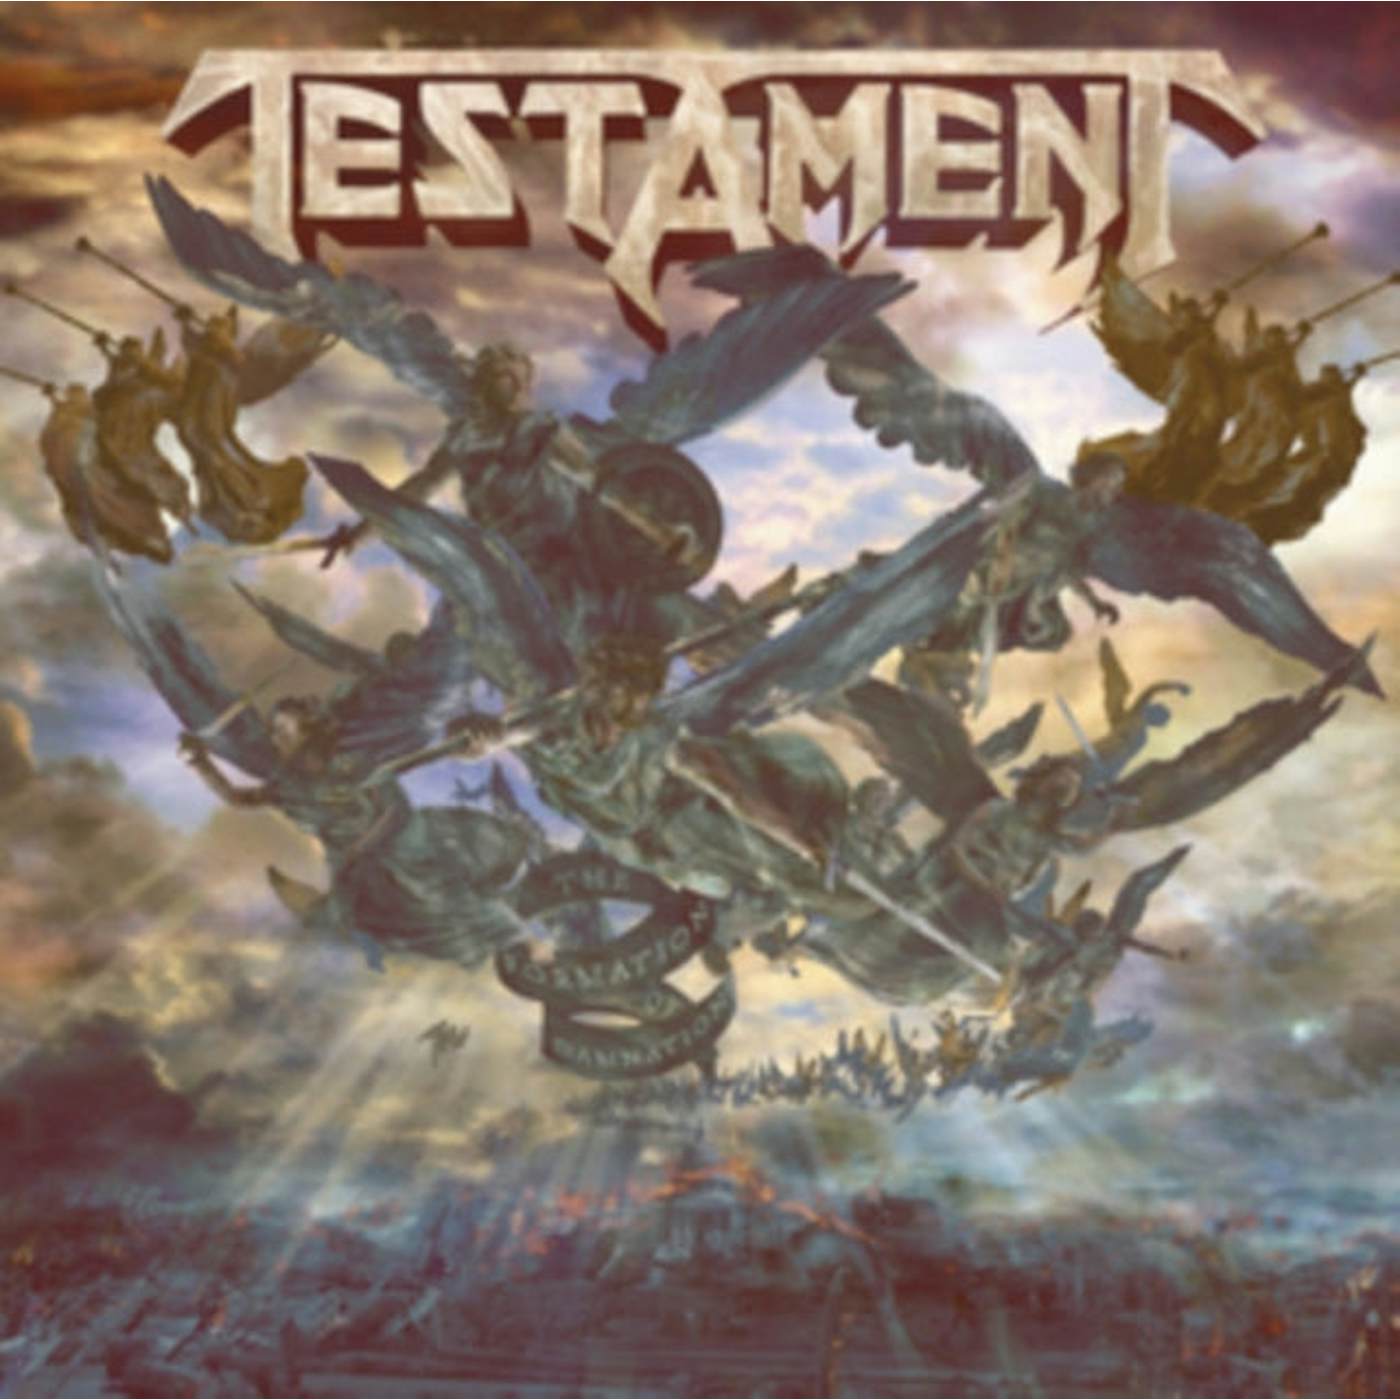 Testament LP Vinyl Record - The Formation Of Damnation